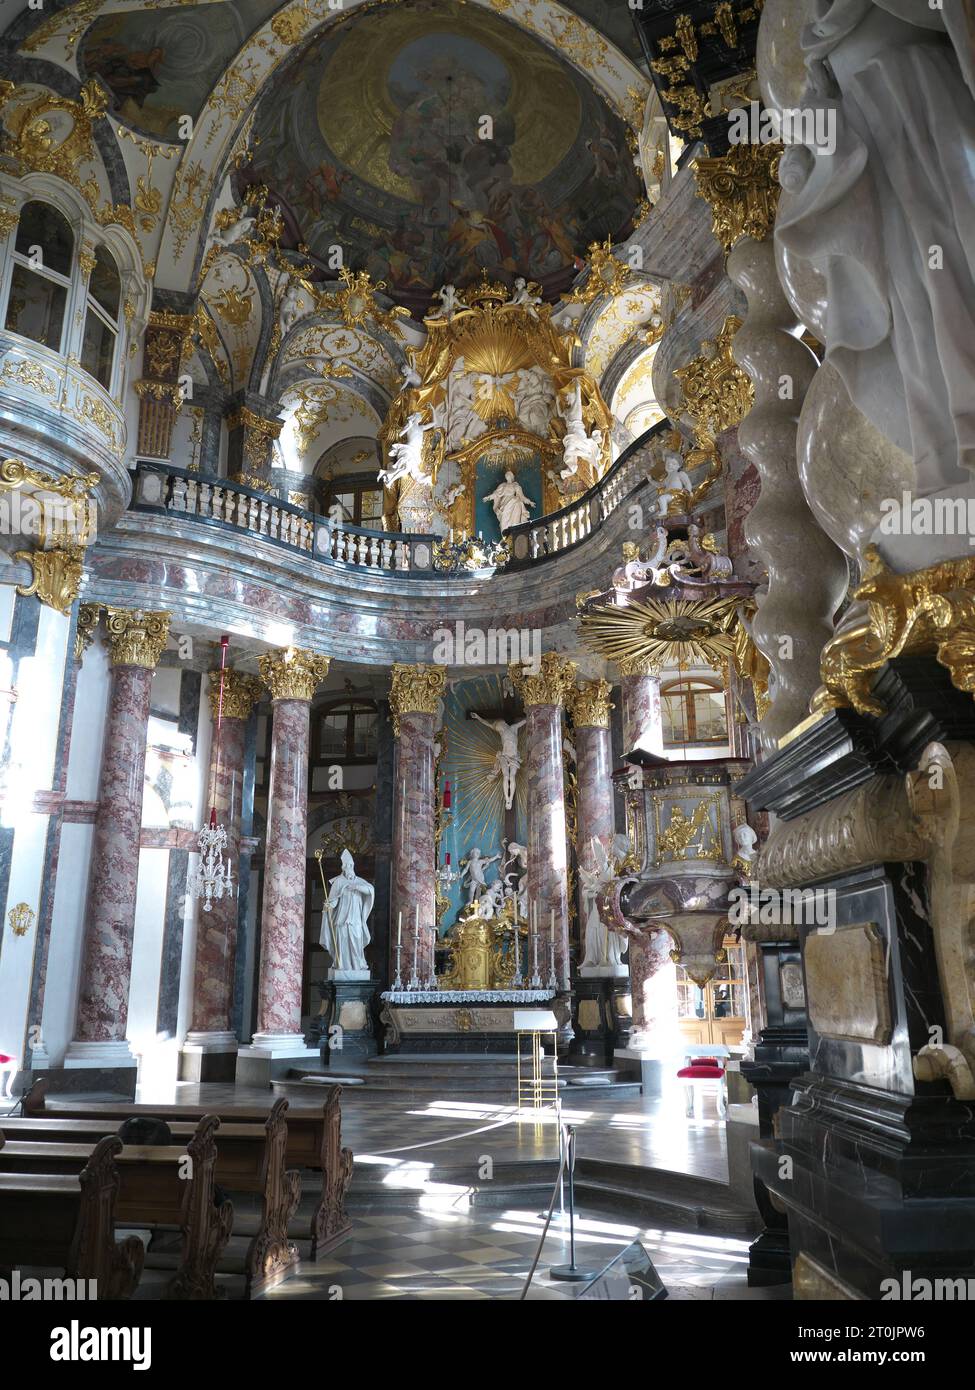 Interior view of the baroque court church of the Würzburg Residence, Germany Stock Photo